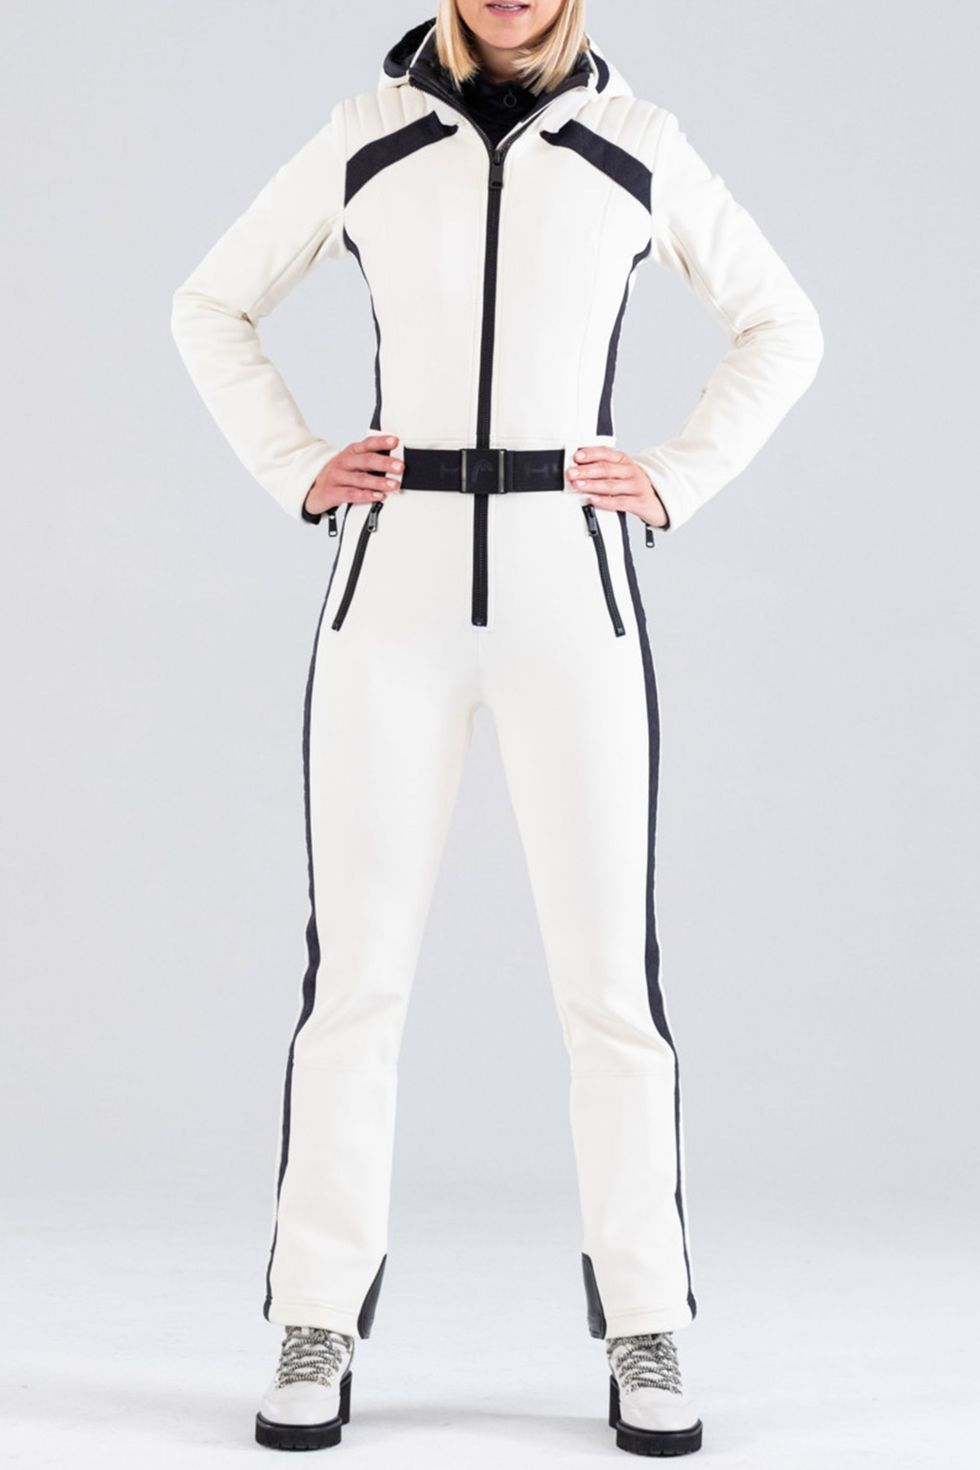 23 Best Women's Ski Suits for Winter — Best Ski Suits for Women